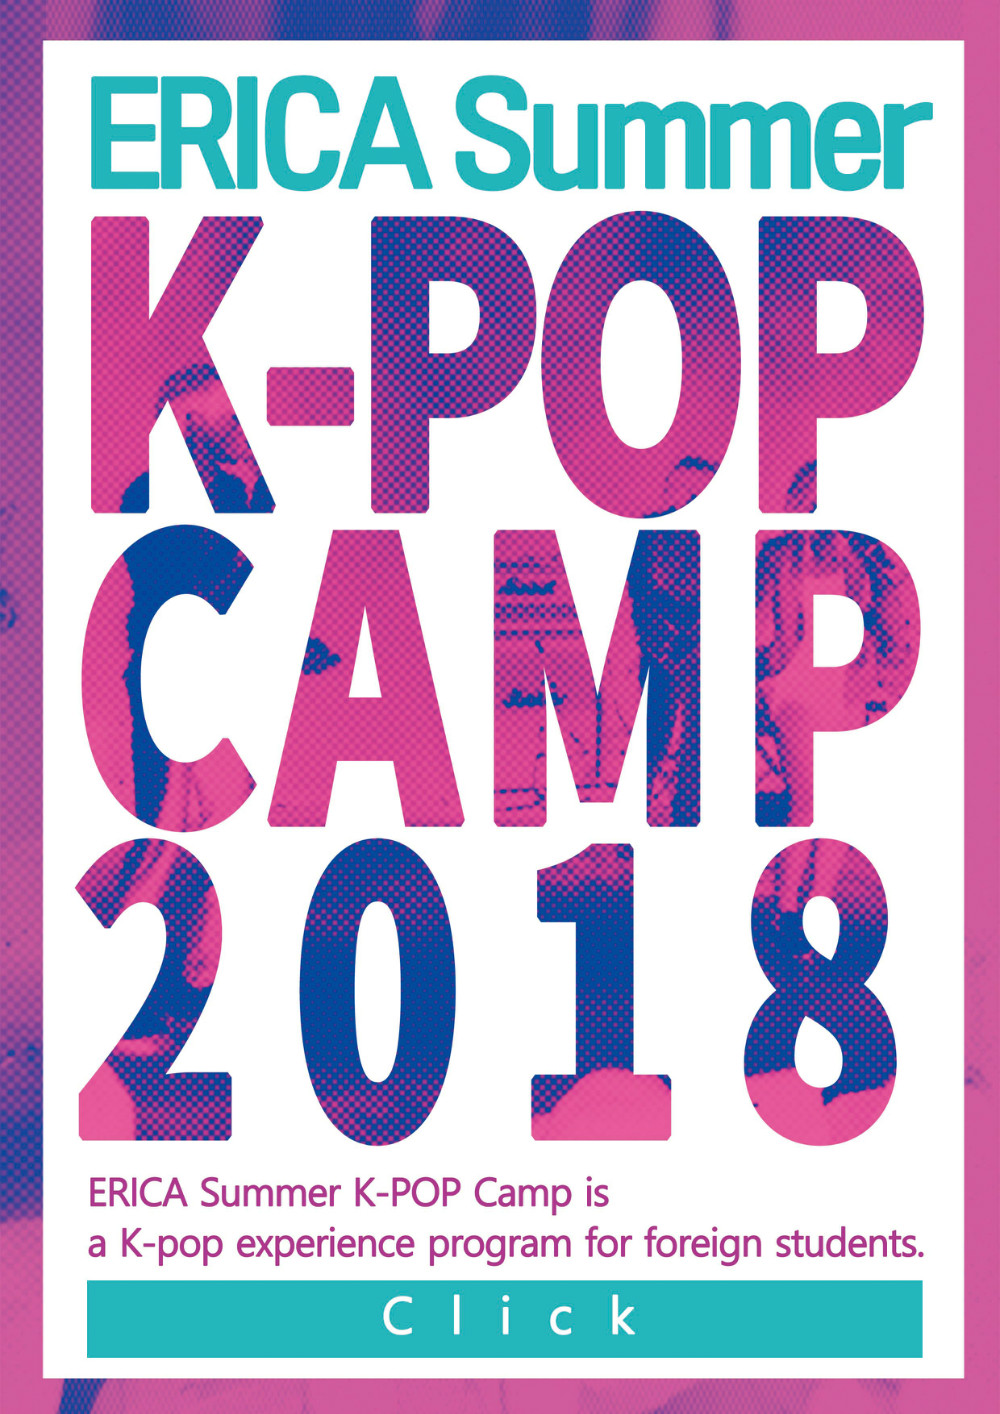 25 Overseas Korean Culture and Information Services offer K-pop Academies